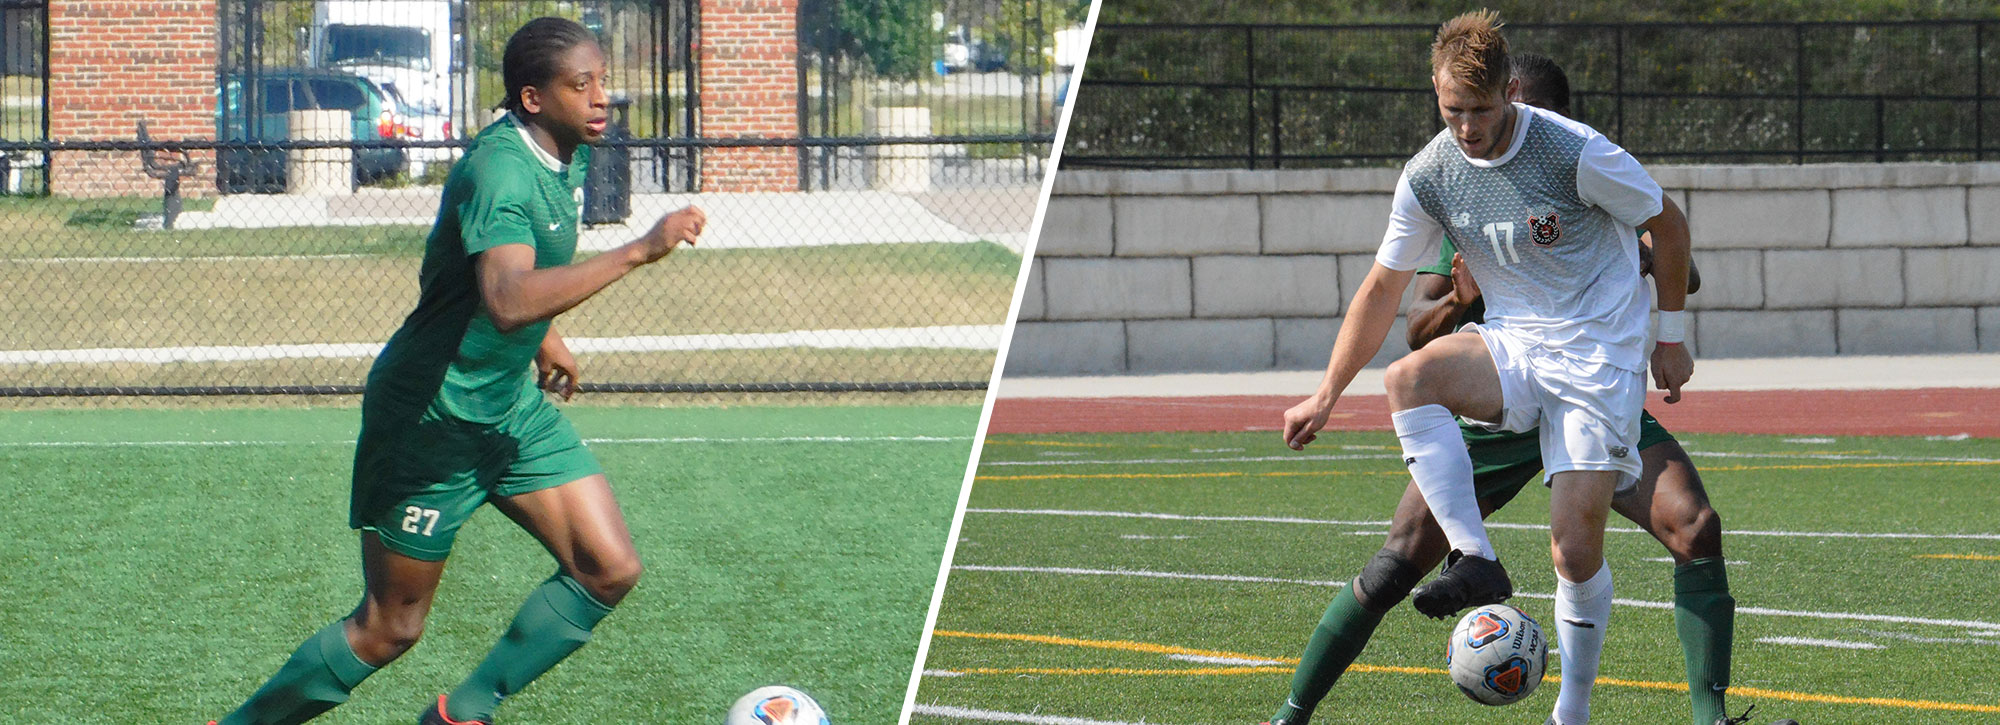 Davenport's Shrimpton, Tiffin's Howell Claim Weekly Men's Soccer Accolades